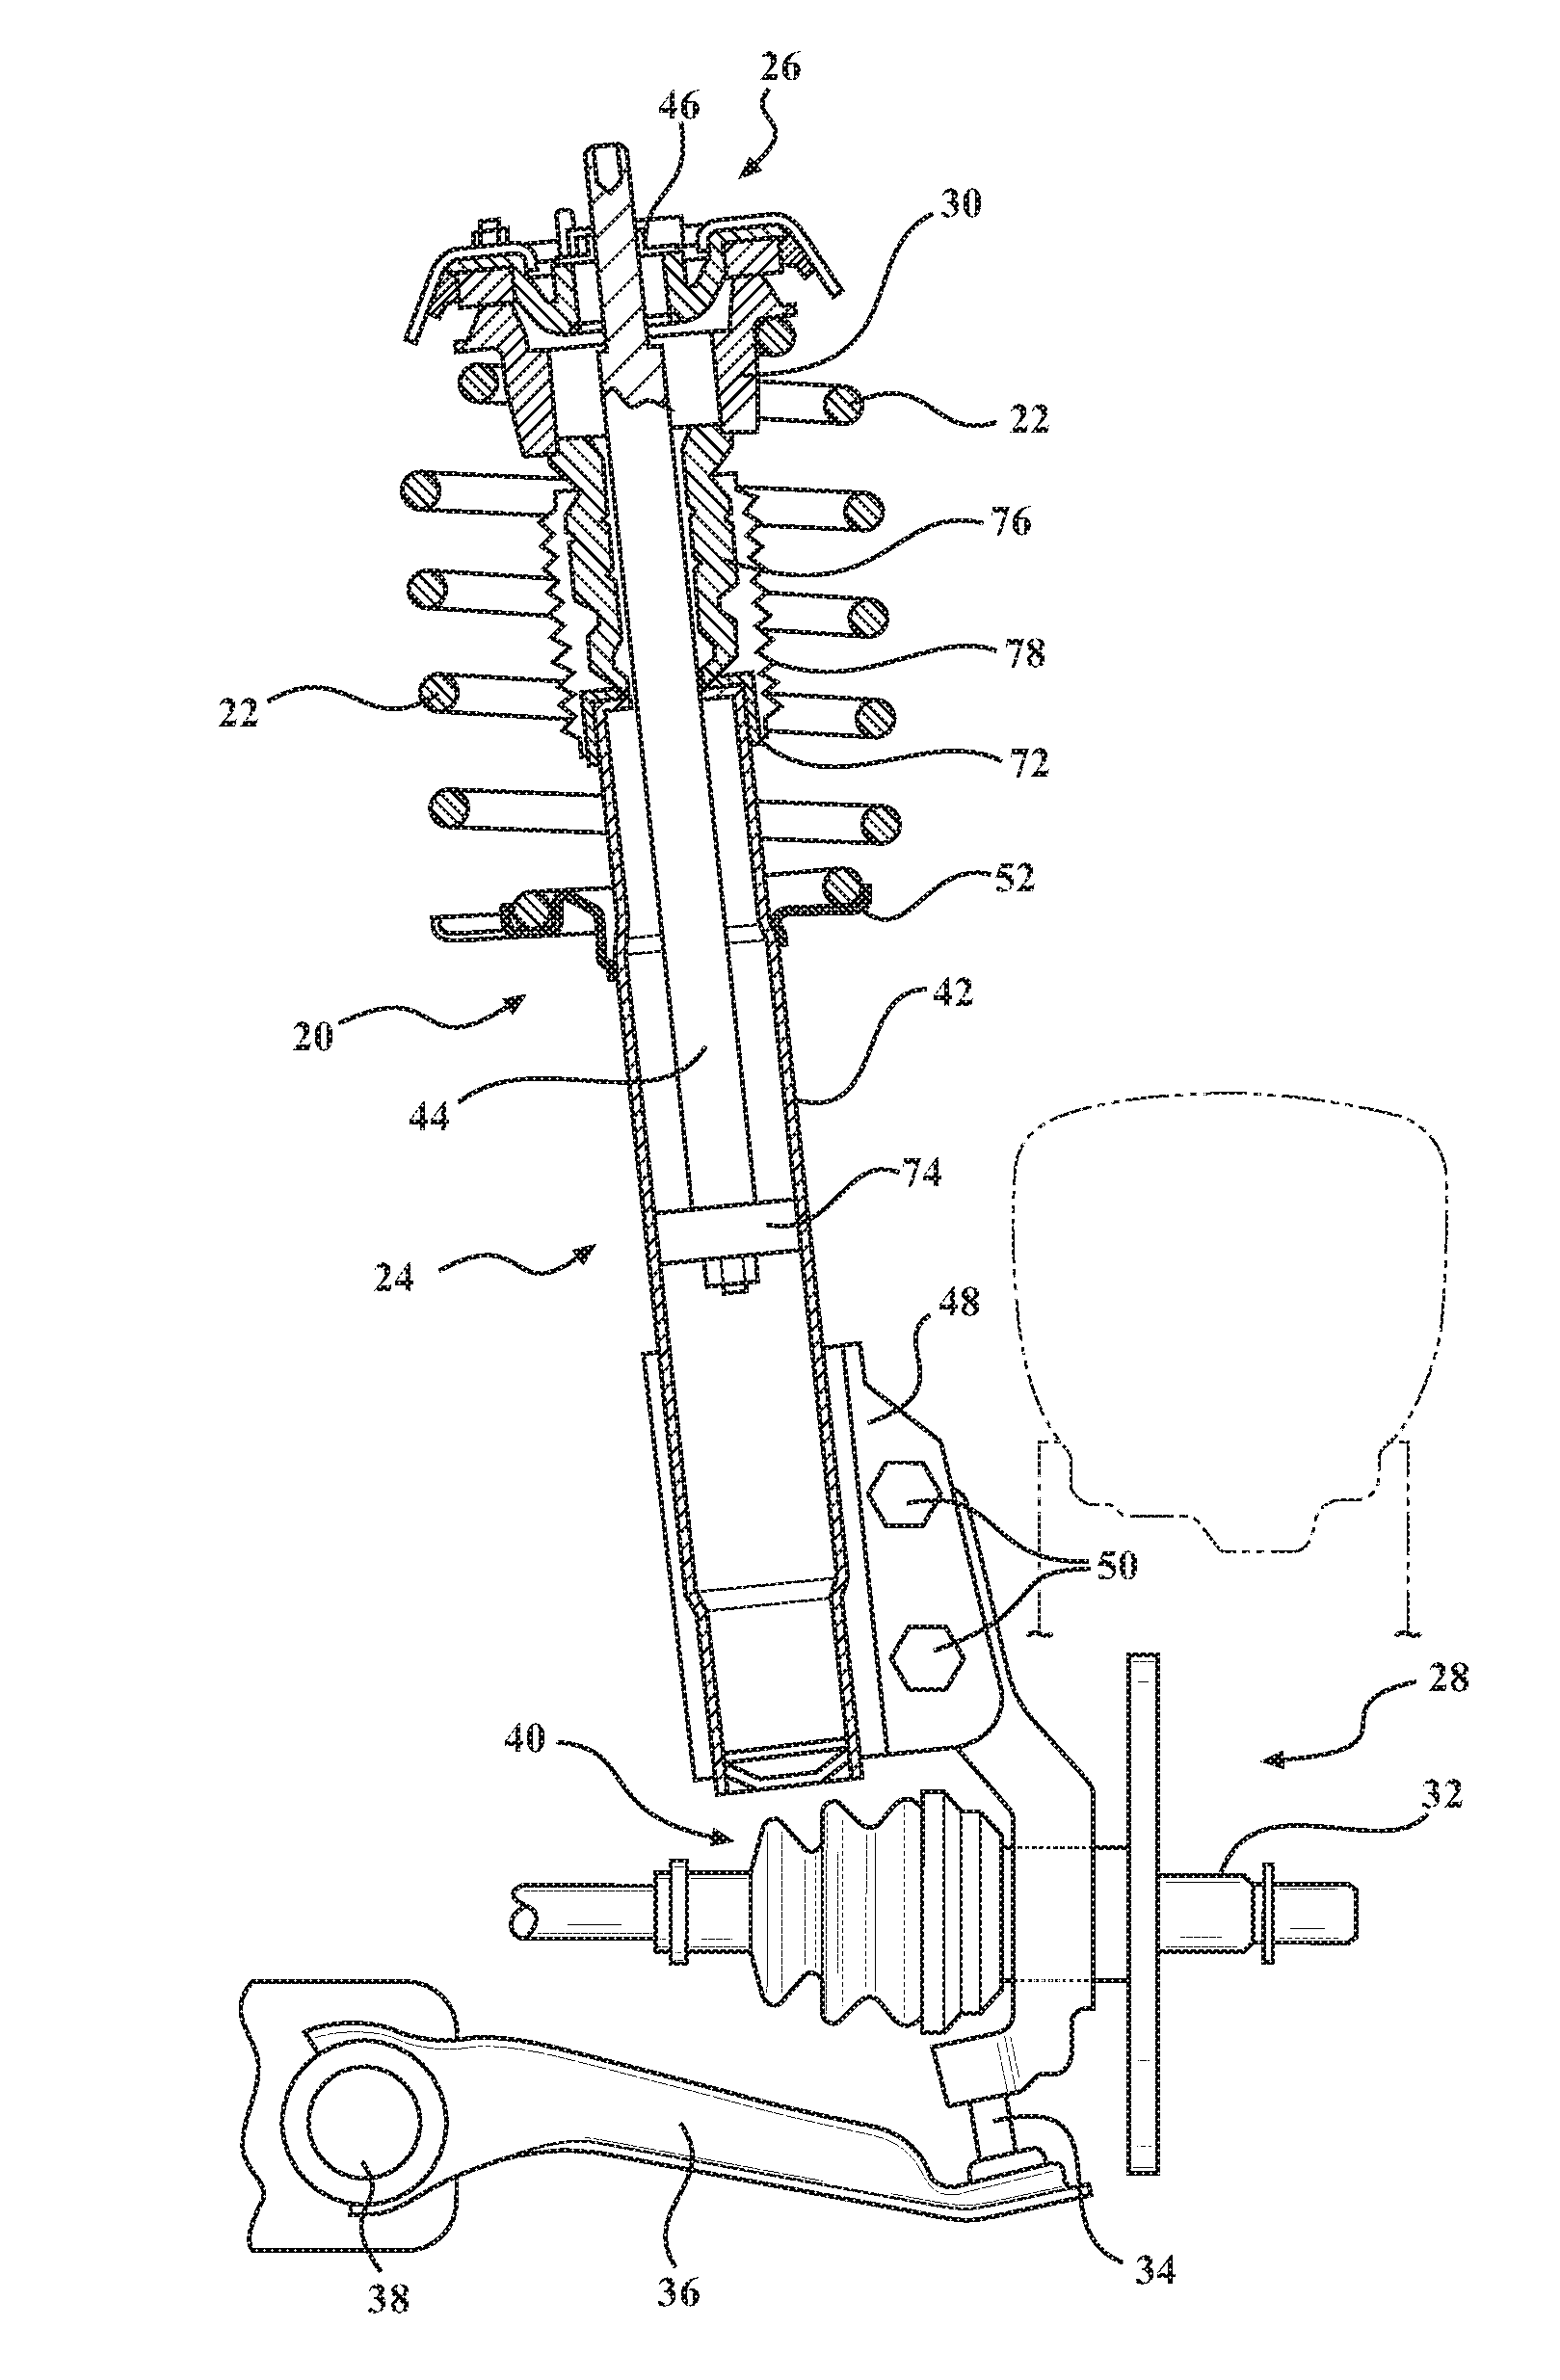 Impact Reinforced Composite Spring Seat for a Shock Absorber